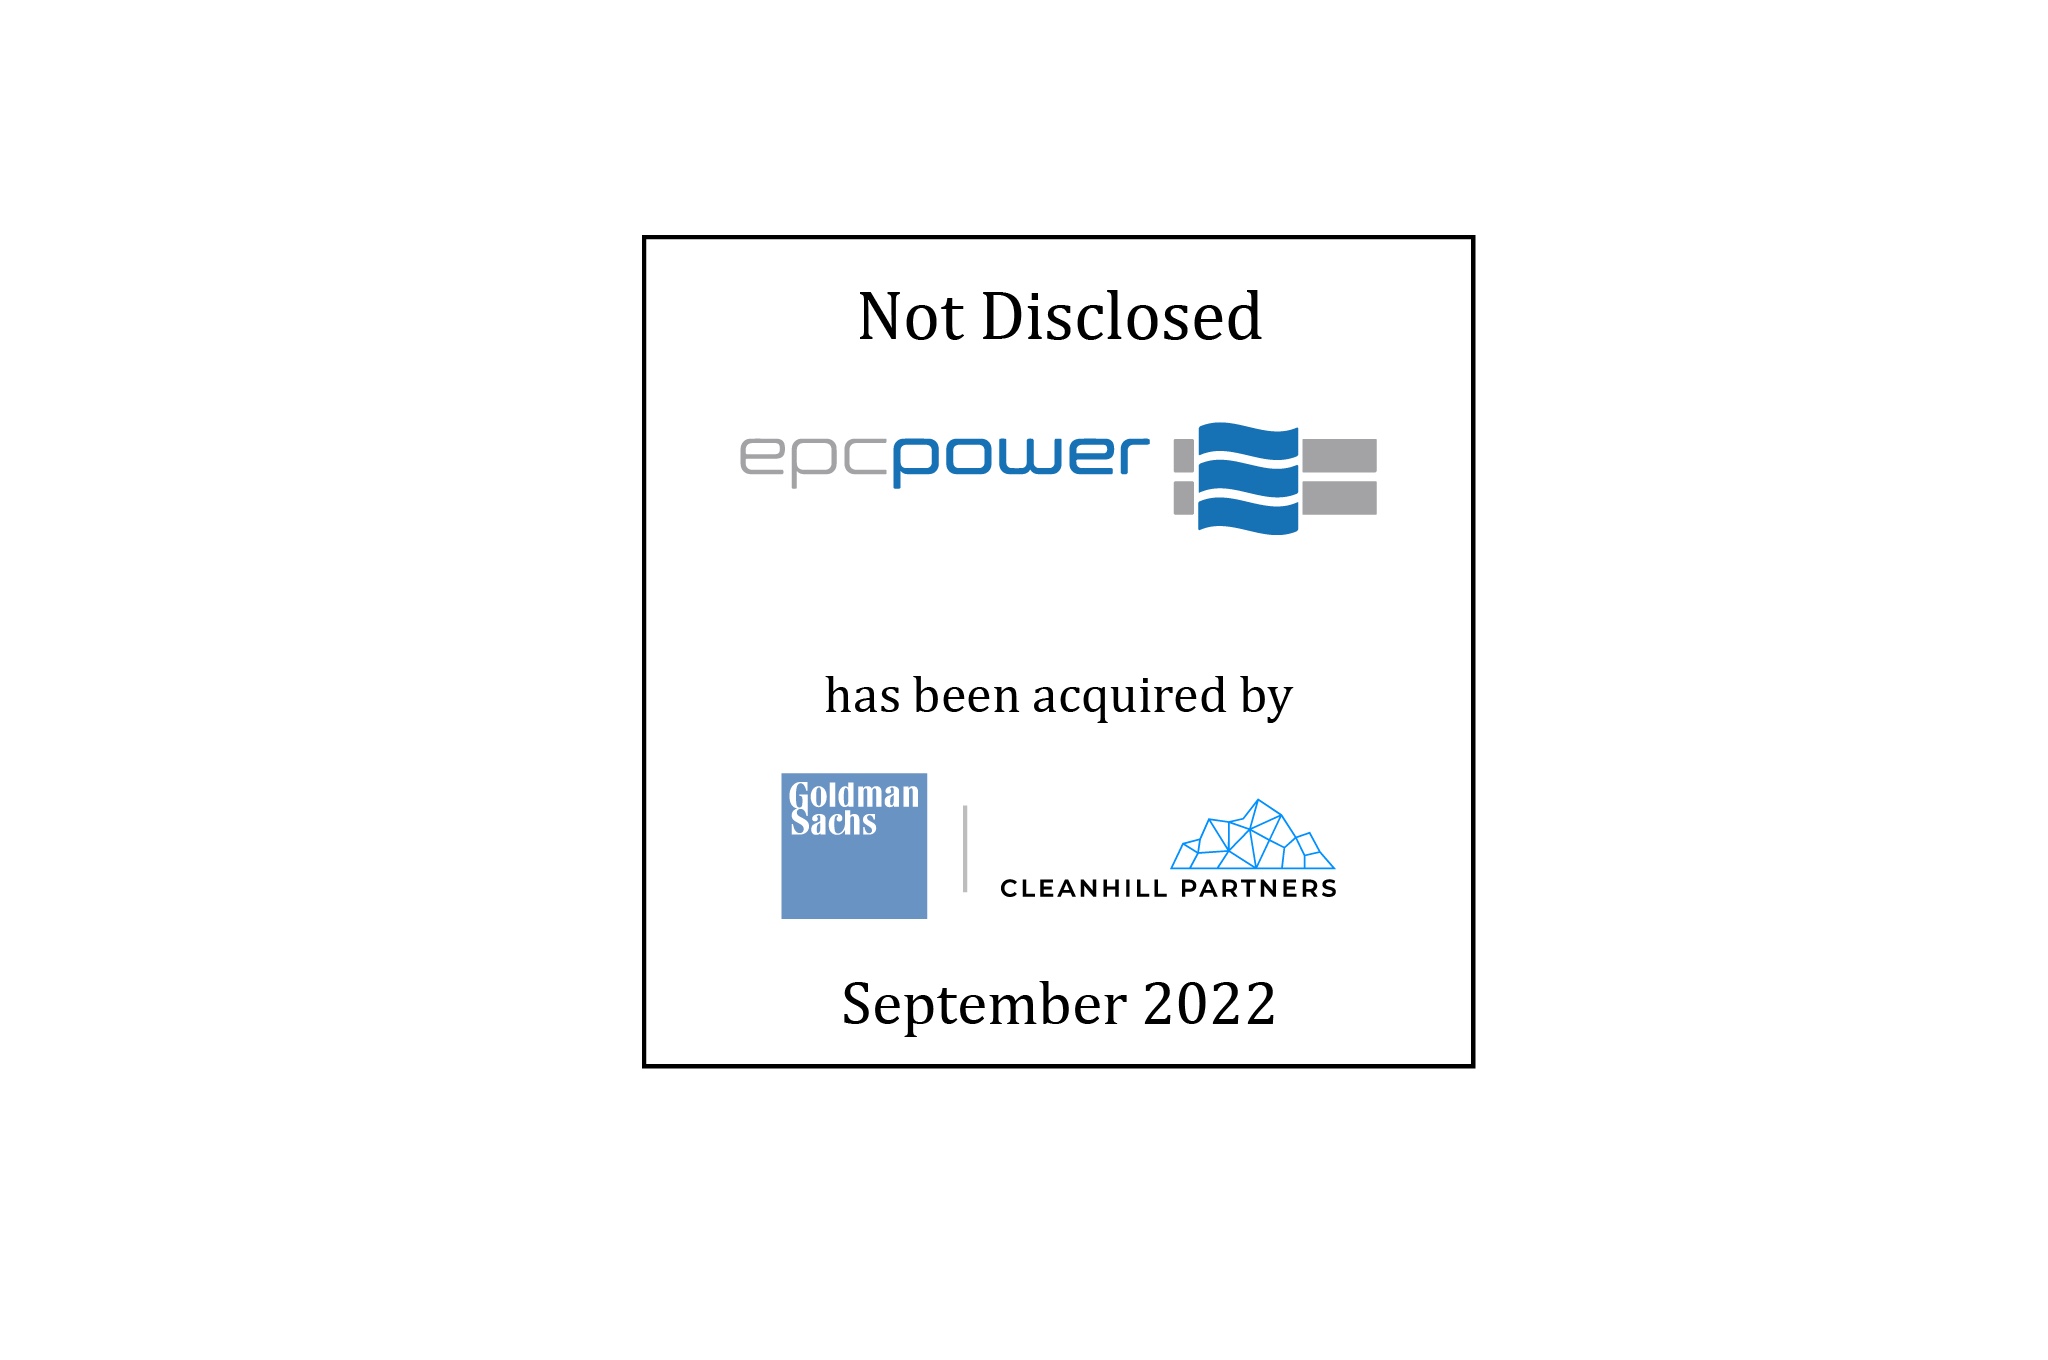 EPCPower has been acquired by Goldman Sachs & Cleanhill Partners